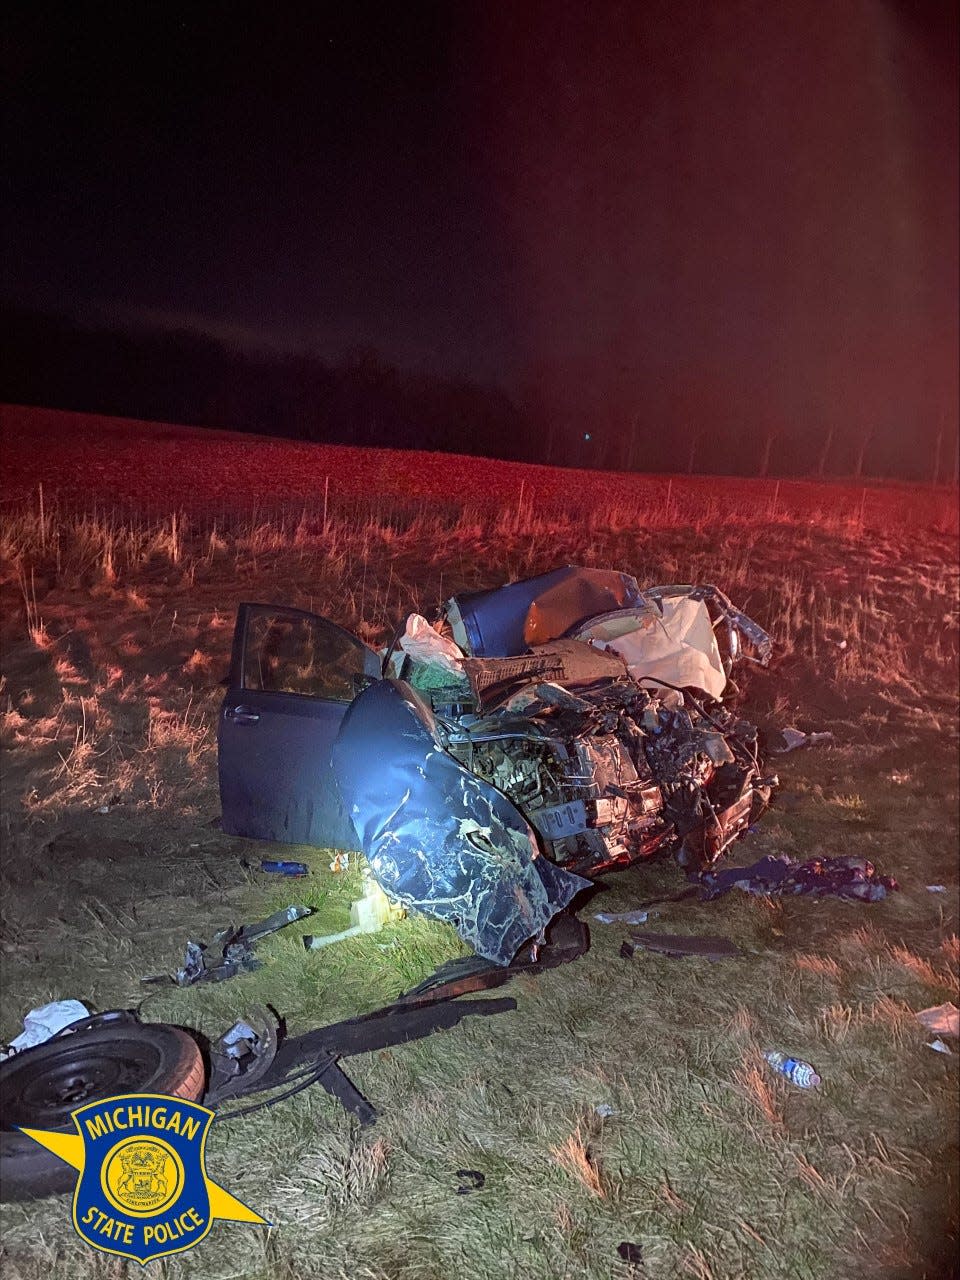 Three people were killed in a head-on crash early Monday on westbound I-94 in Marengo Township.